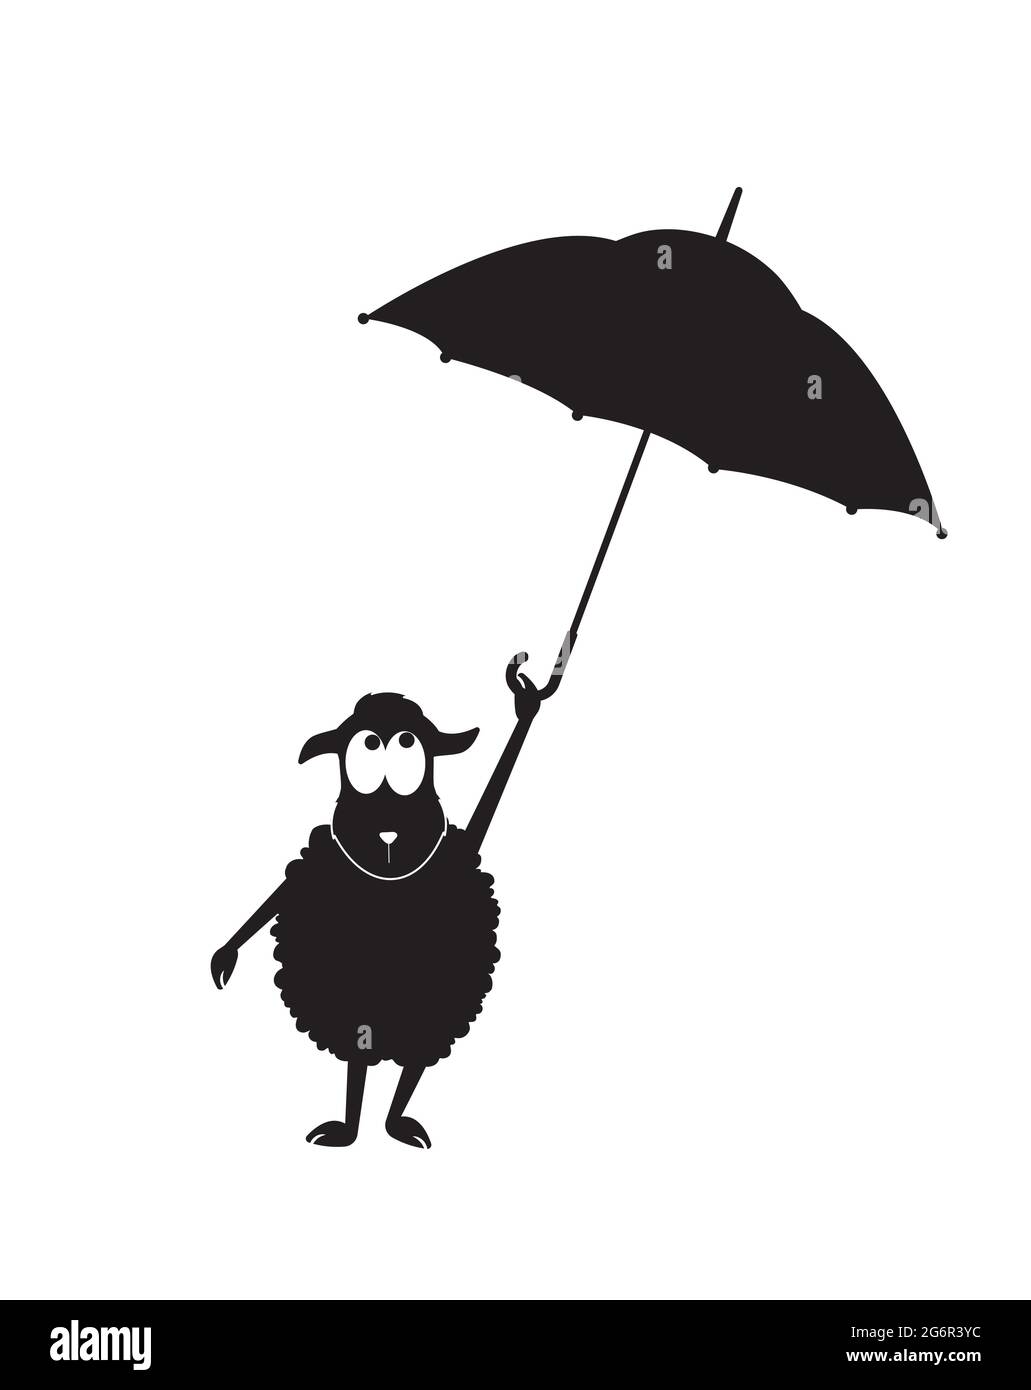 Sheep silhouette holding umbrella, vector. Cartoon character illustration. Childish poster design isolated on white background, wall art work, wall de Stock Vector